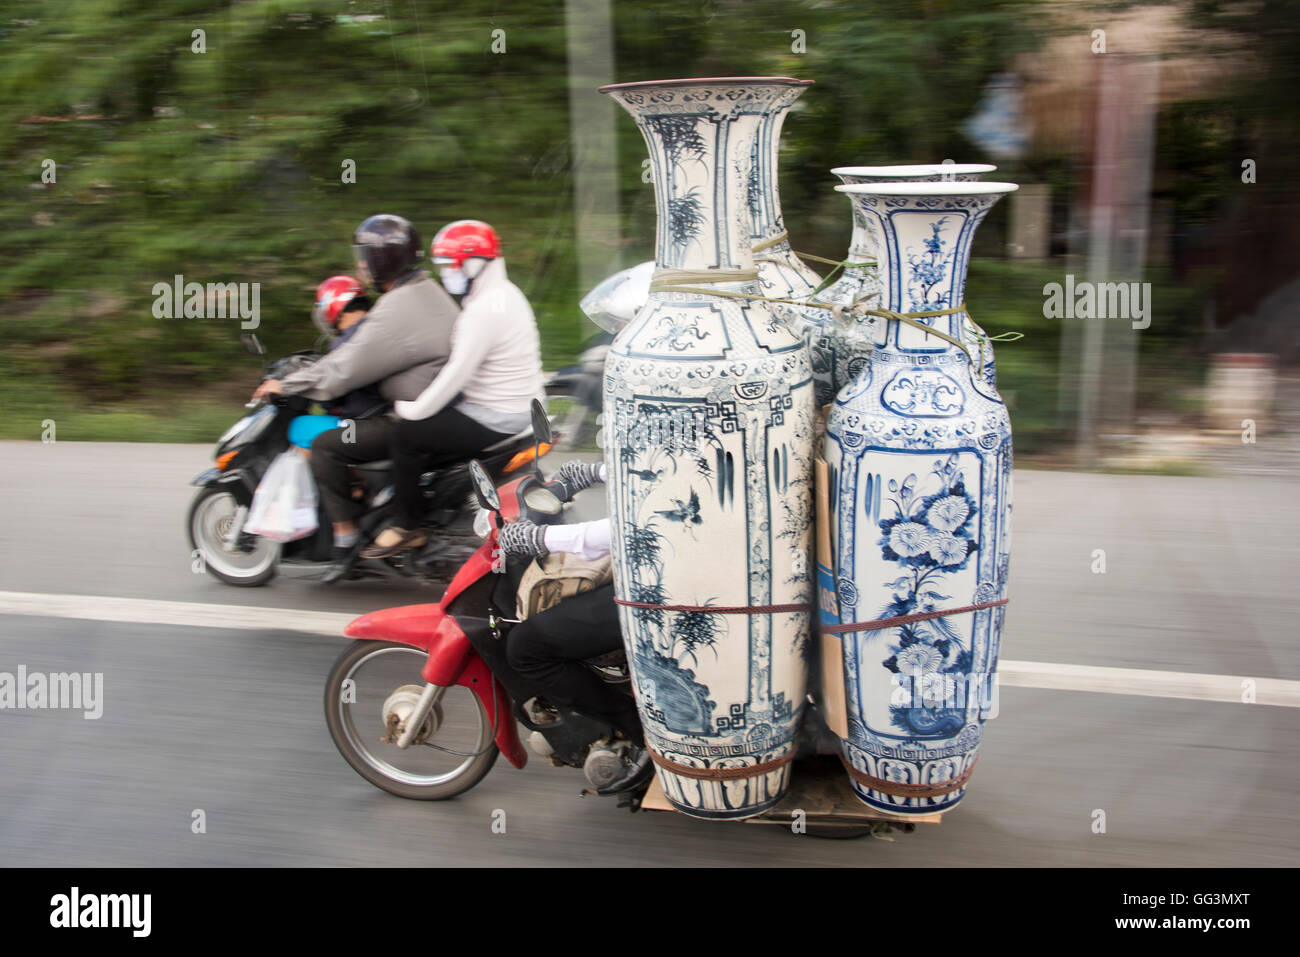 Motorbike carrying vases on the street of Vietnam, near Saigon, also family of three on another motorbike. Typical street scene Stock Photo